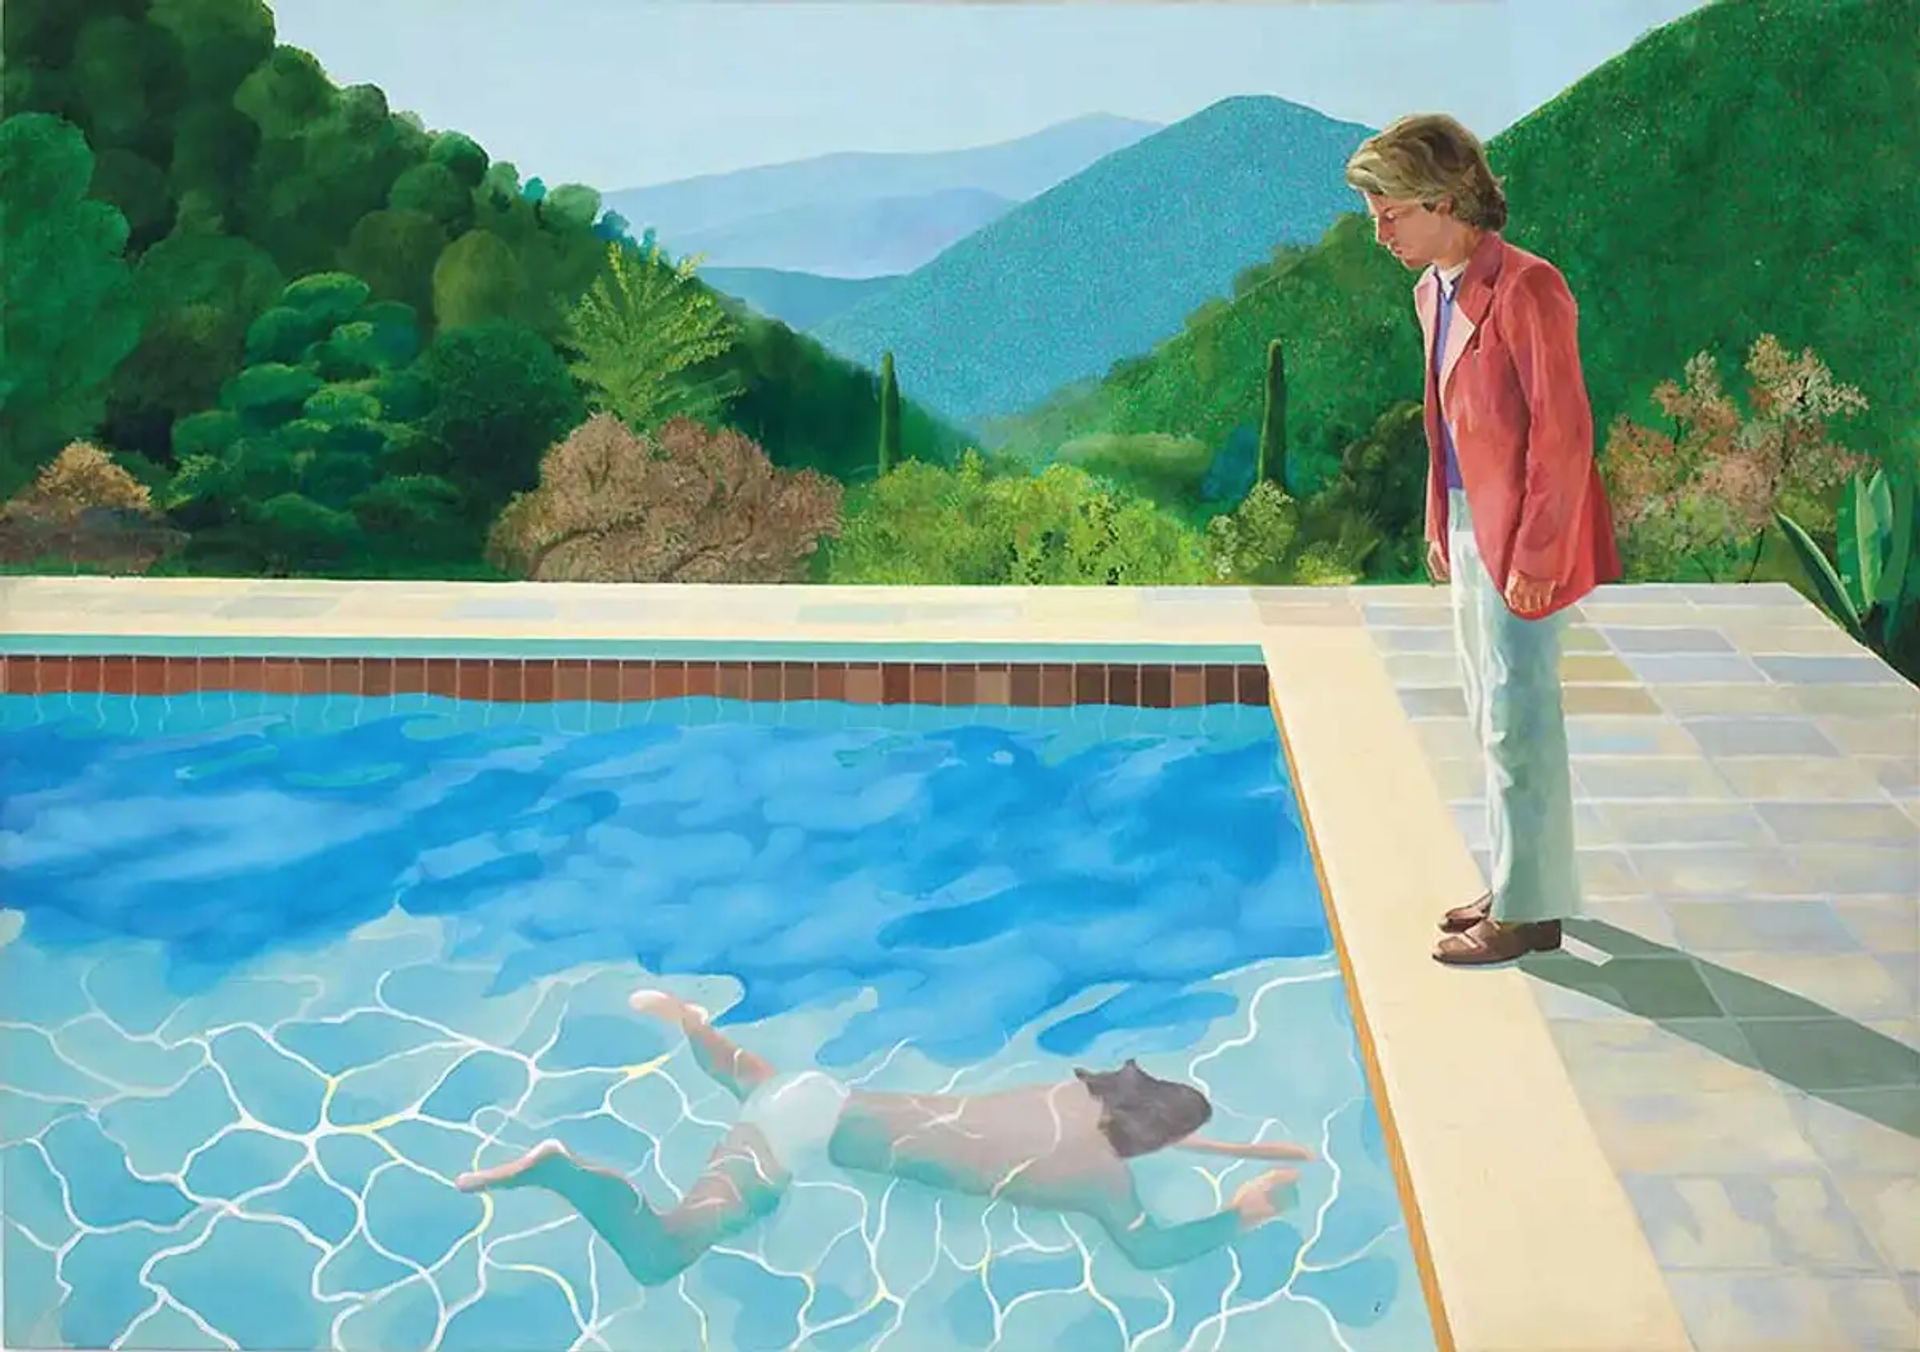 A man in a pink blazer stands over the edge of a pool, where another man swims under the water.